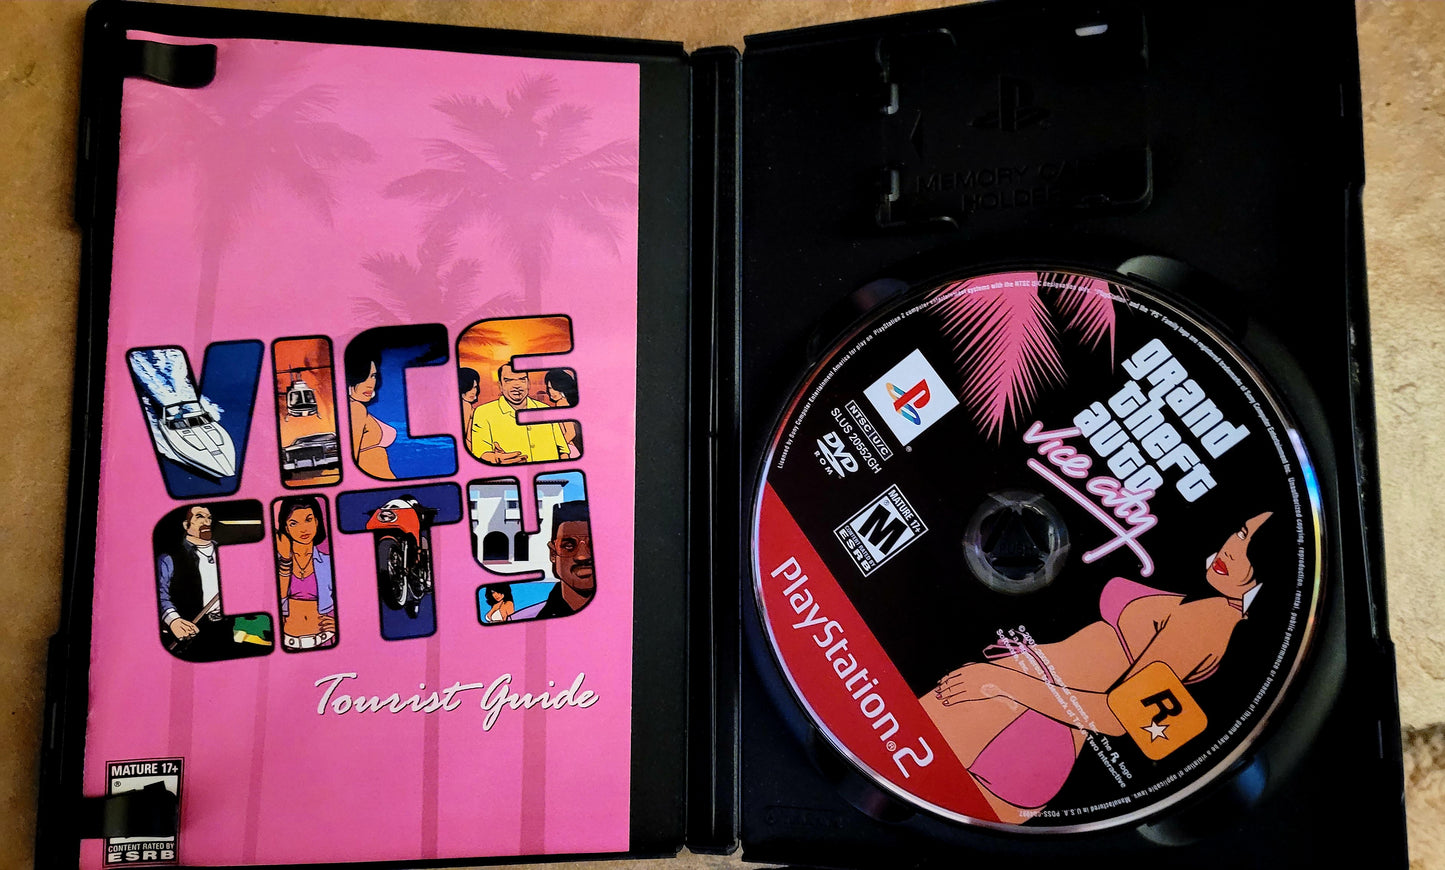 PS2 - Grand Theft Auto III & Vice City 2-Disc Games